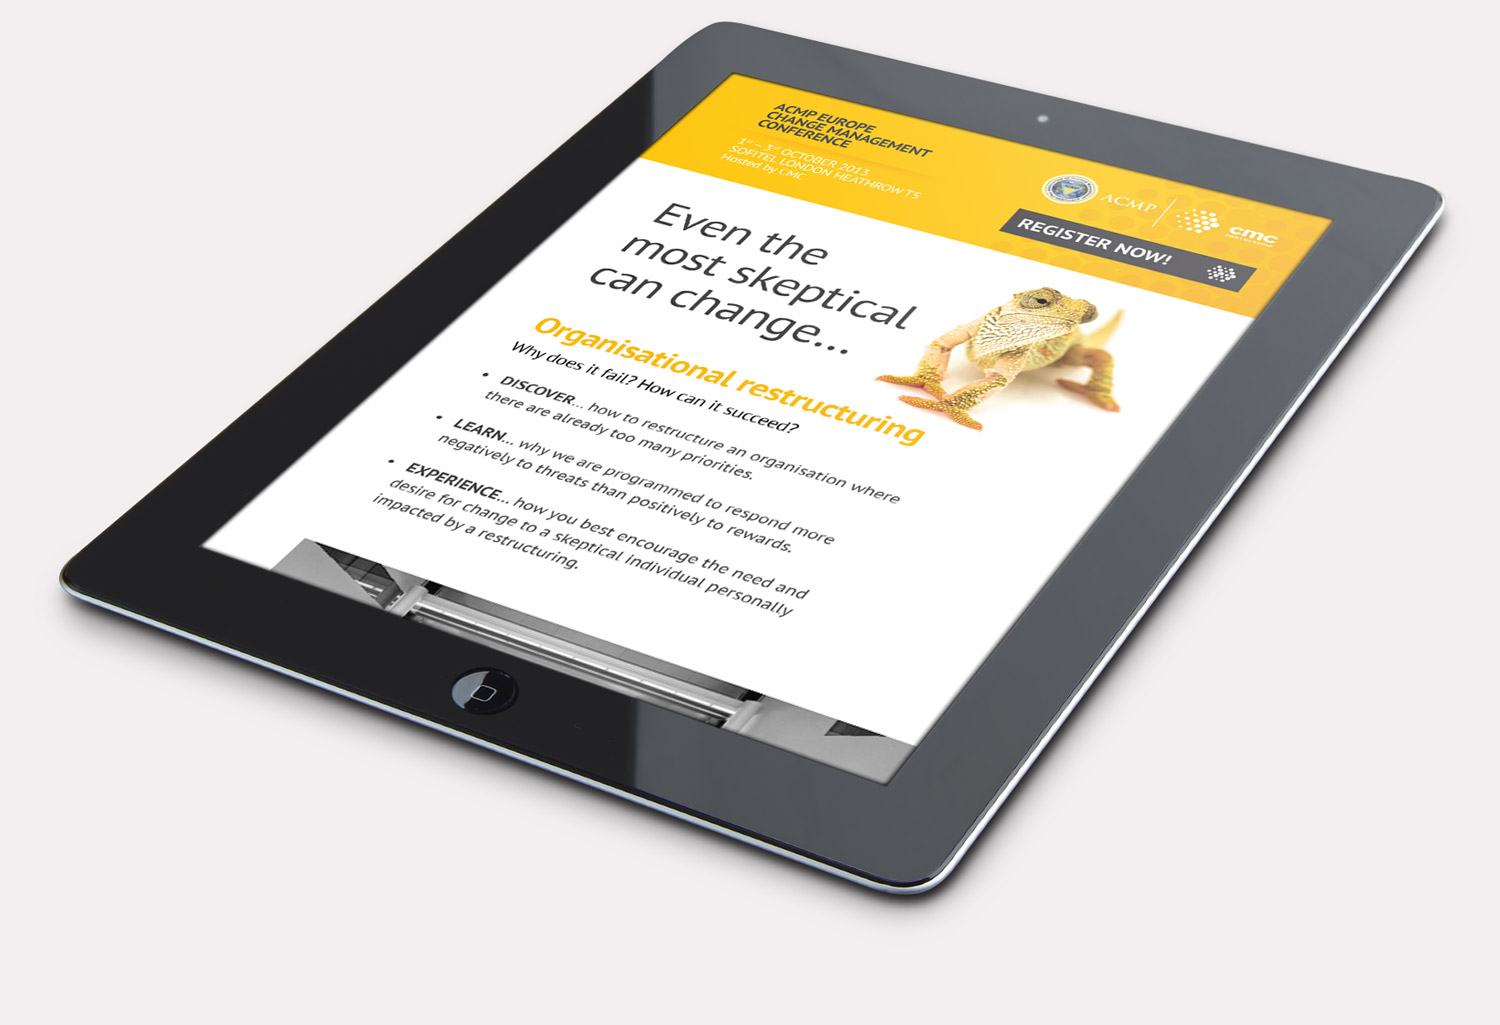 Conference email design displayed on tablet device